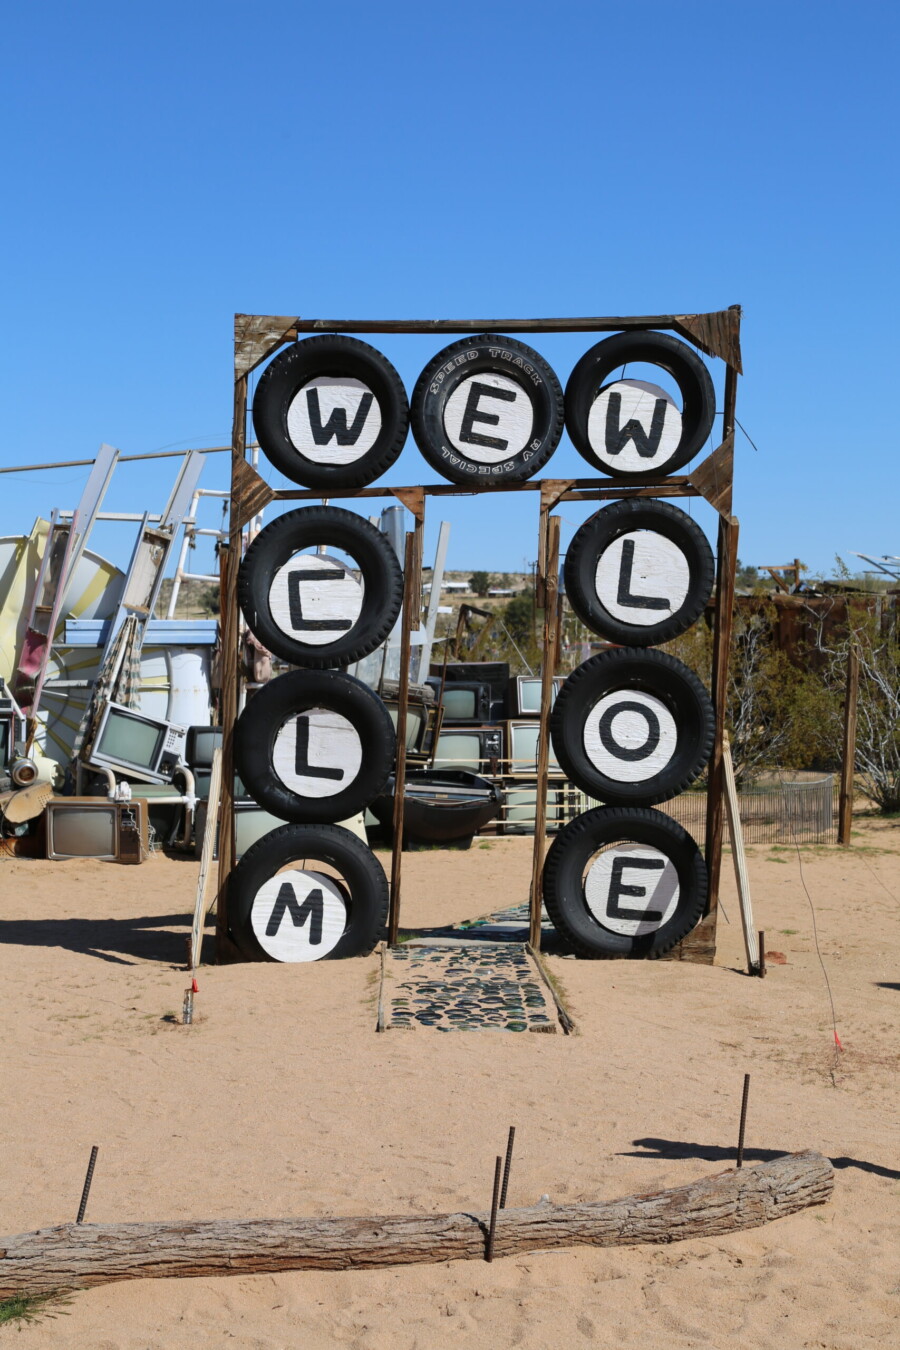 A welcome sculpture made out of repurposed tires at the Noah Purifoy Outdoor Sculpture Assemblage museum in Joshua Tree, California.